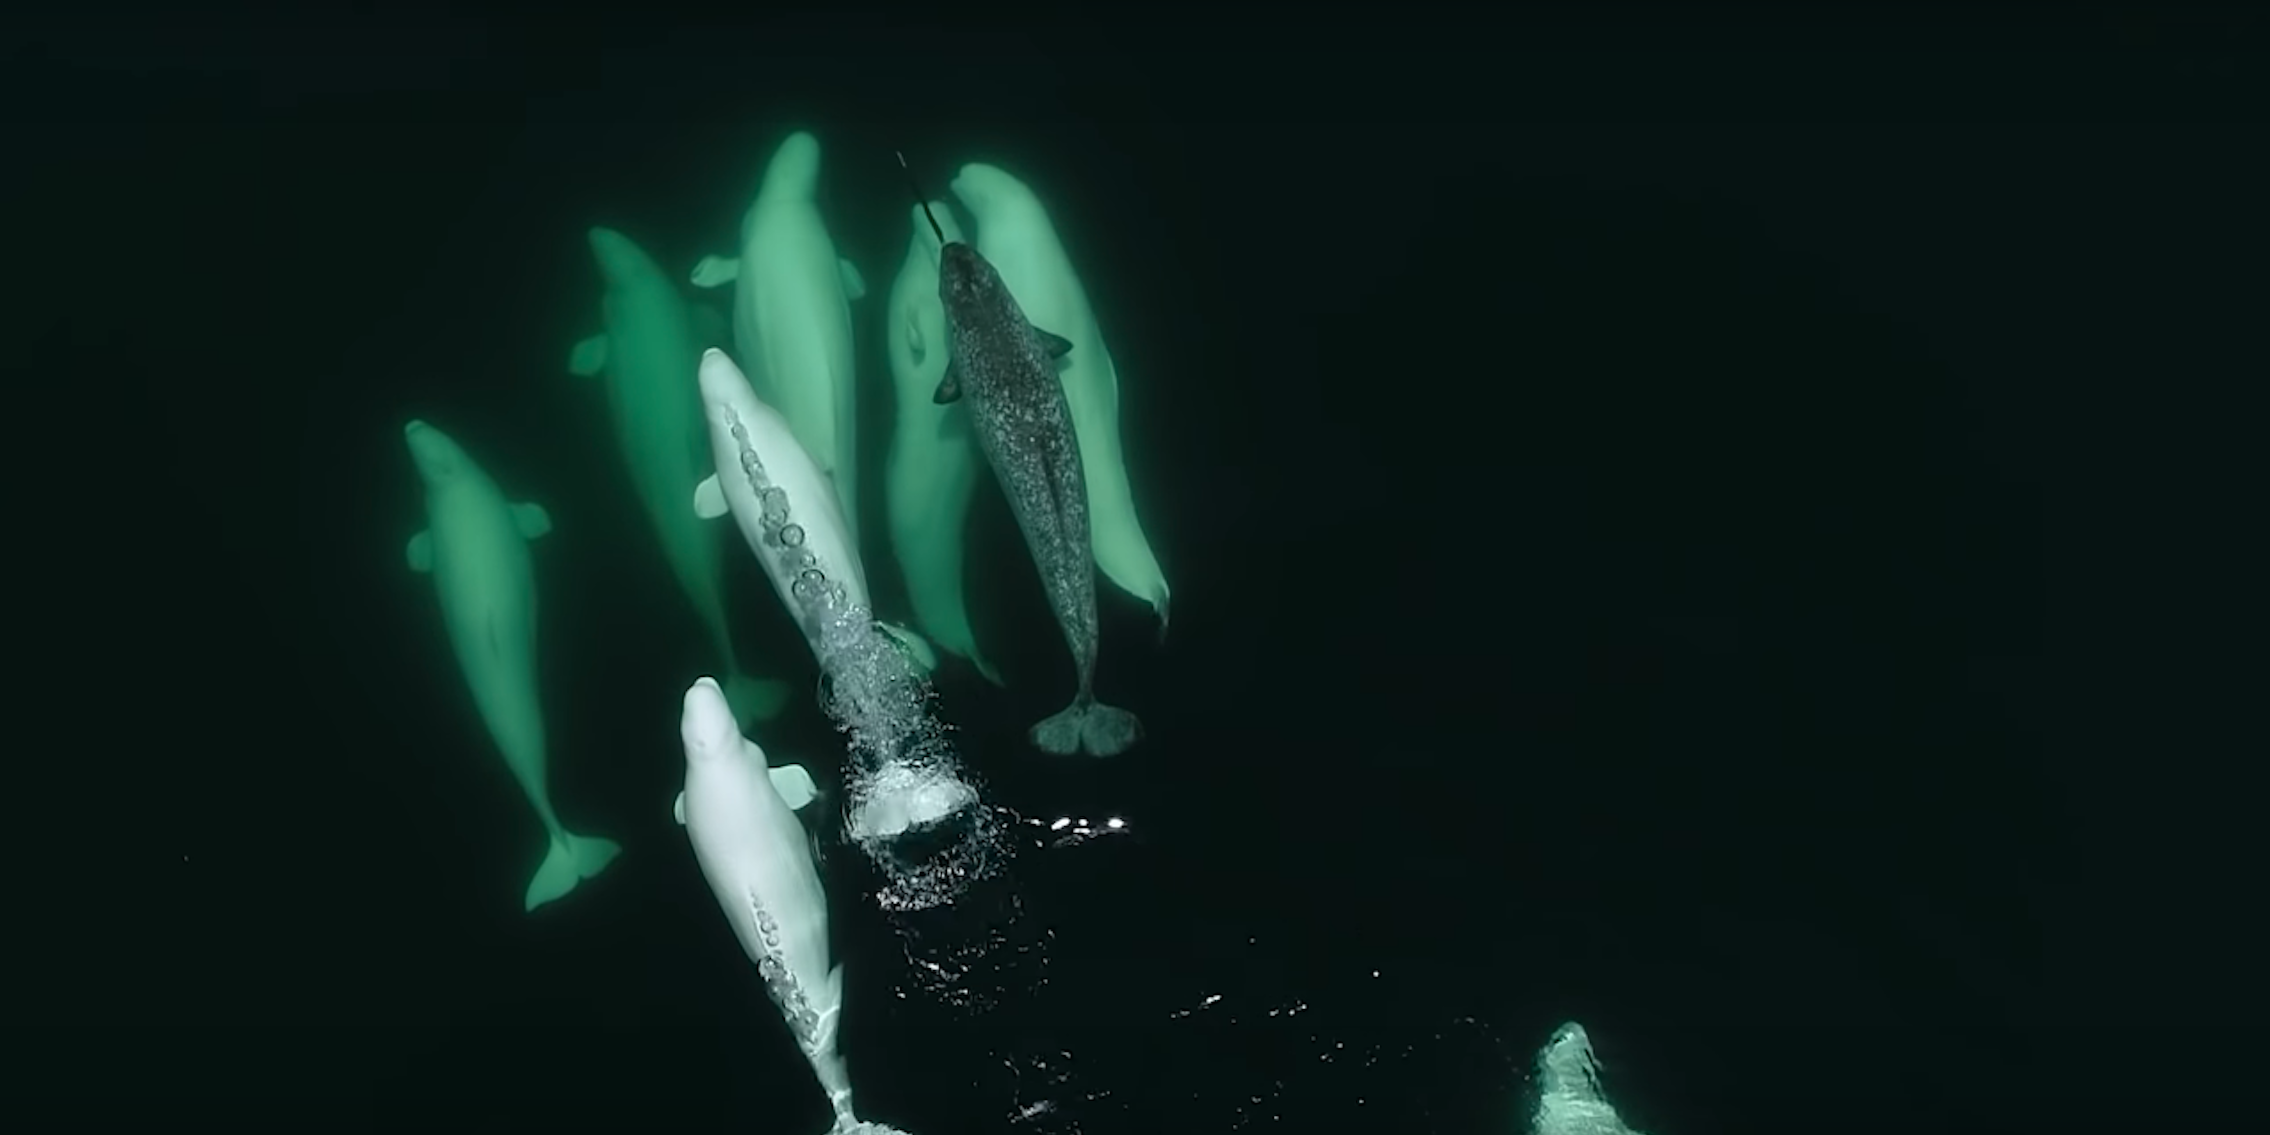 narwhal with beluga whales